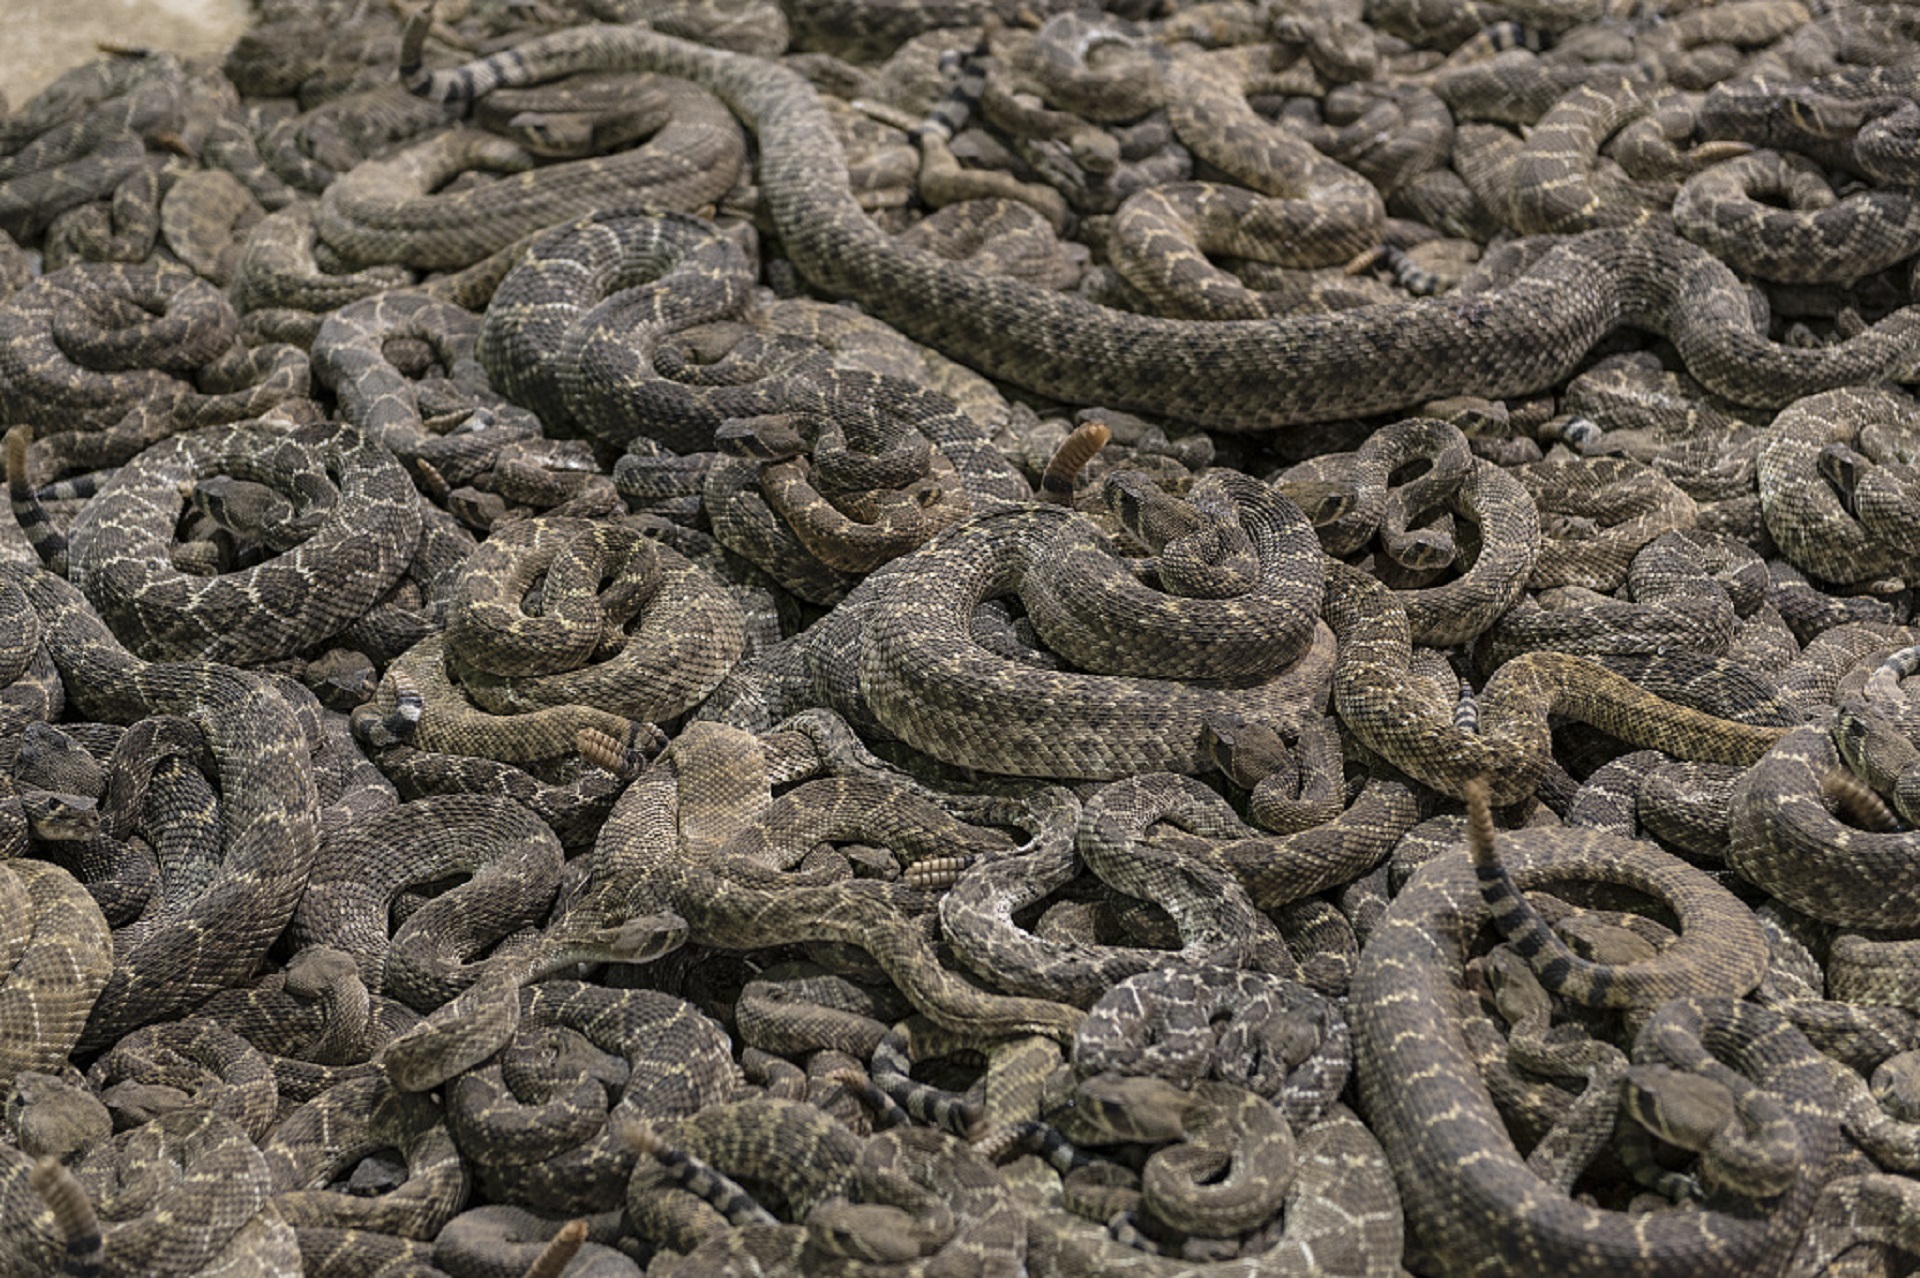 Group of Rattlesnakes, Animal, Group, Nature, Rattle, HQ Photo